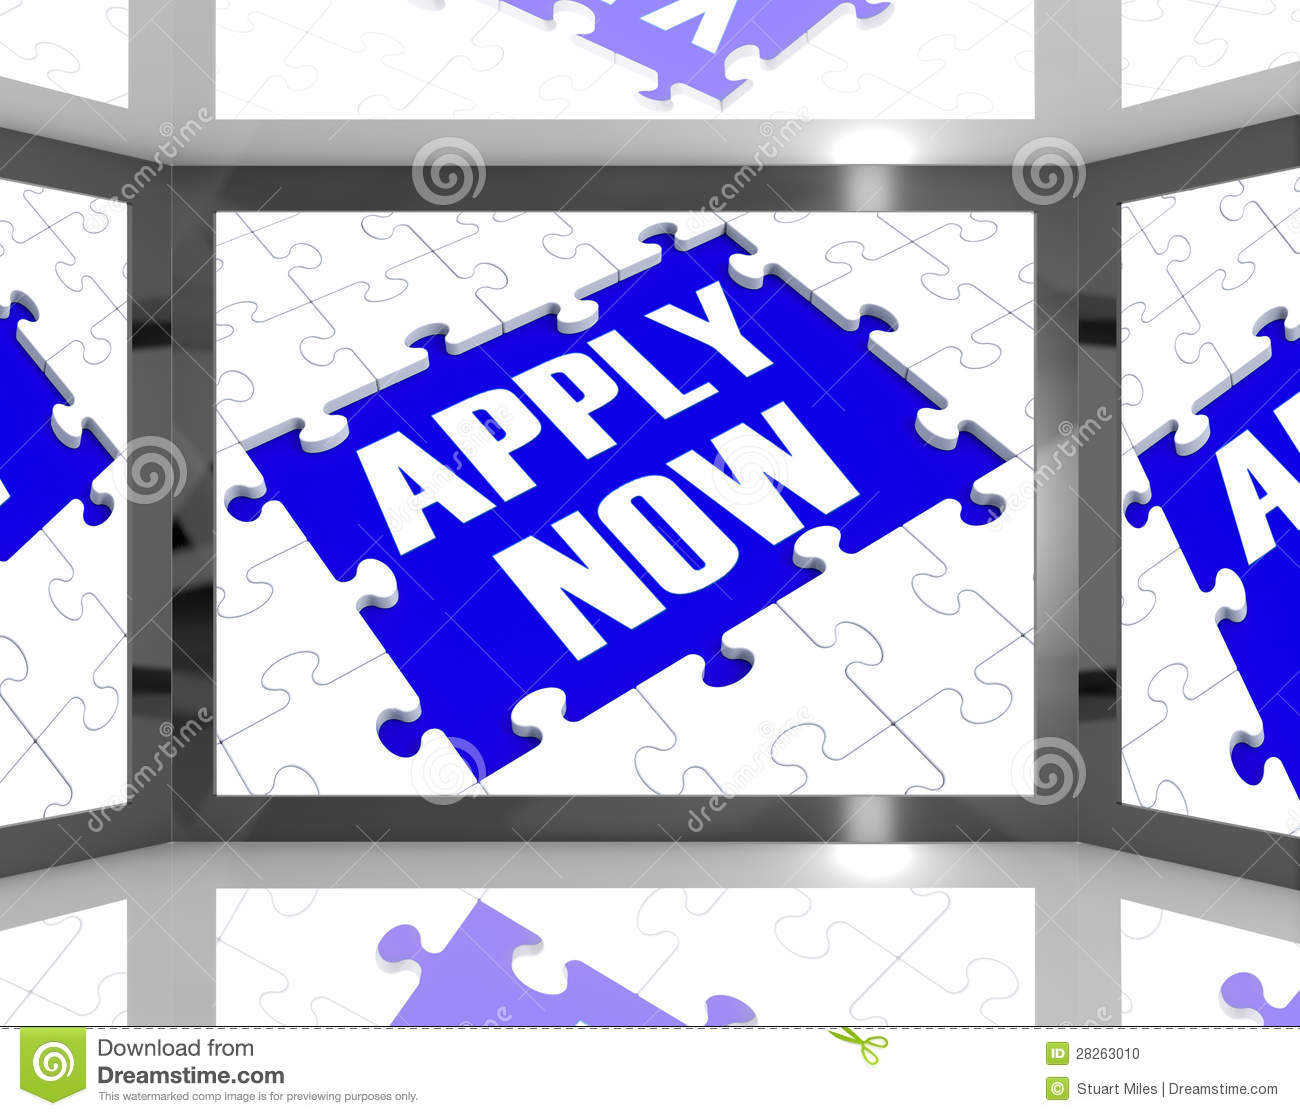 Apply Now On Screen Showing Job Recruitment Stock Photo   Image